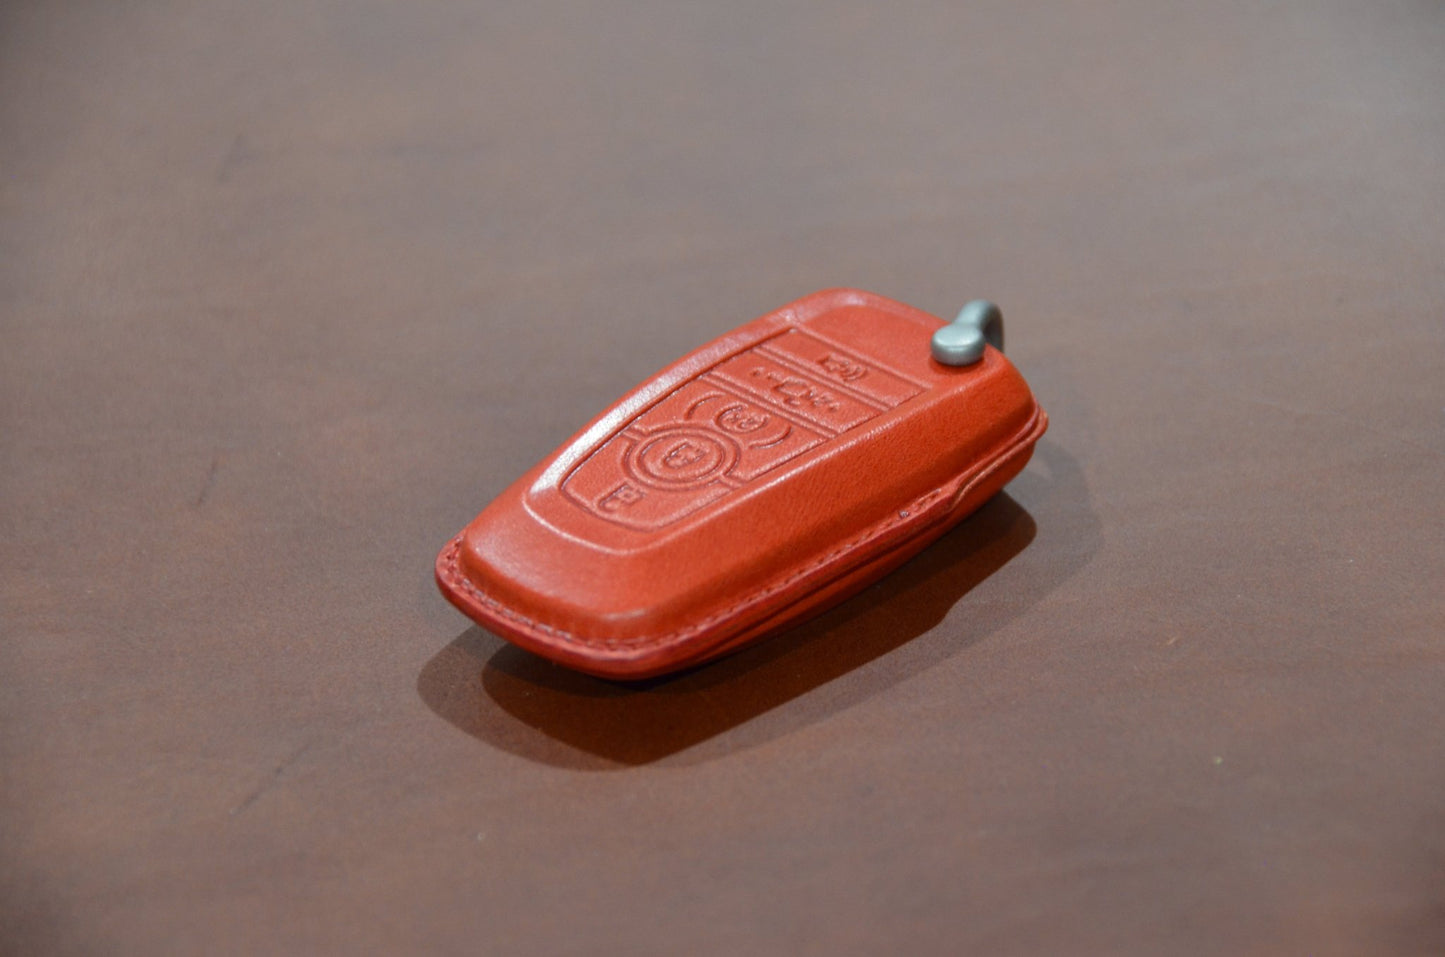 RED EDITION Leather Key Fob Cover for Ford - NATS GOODS CO.